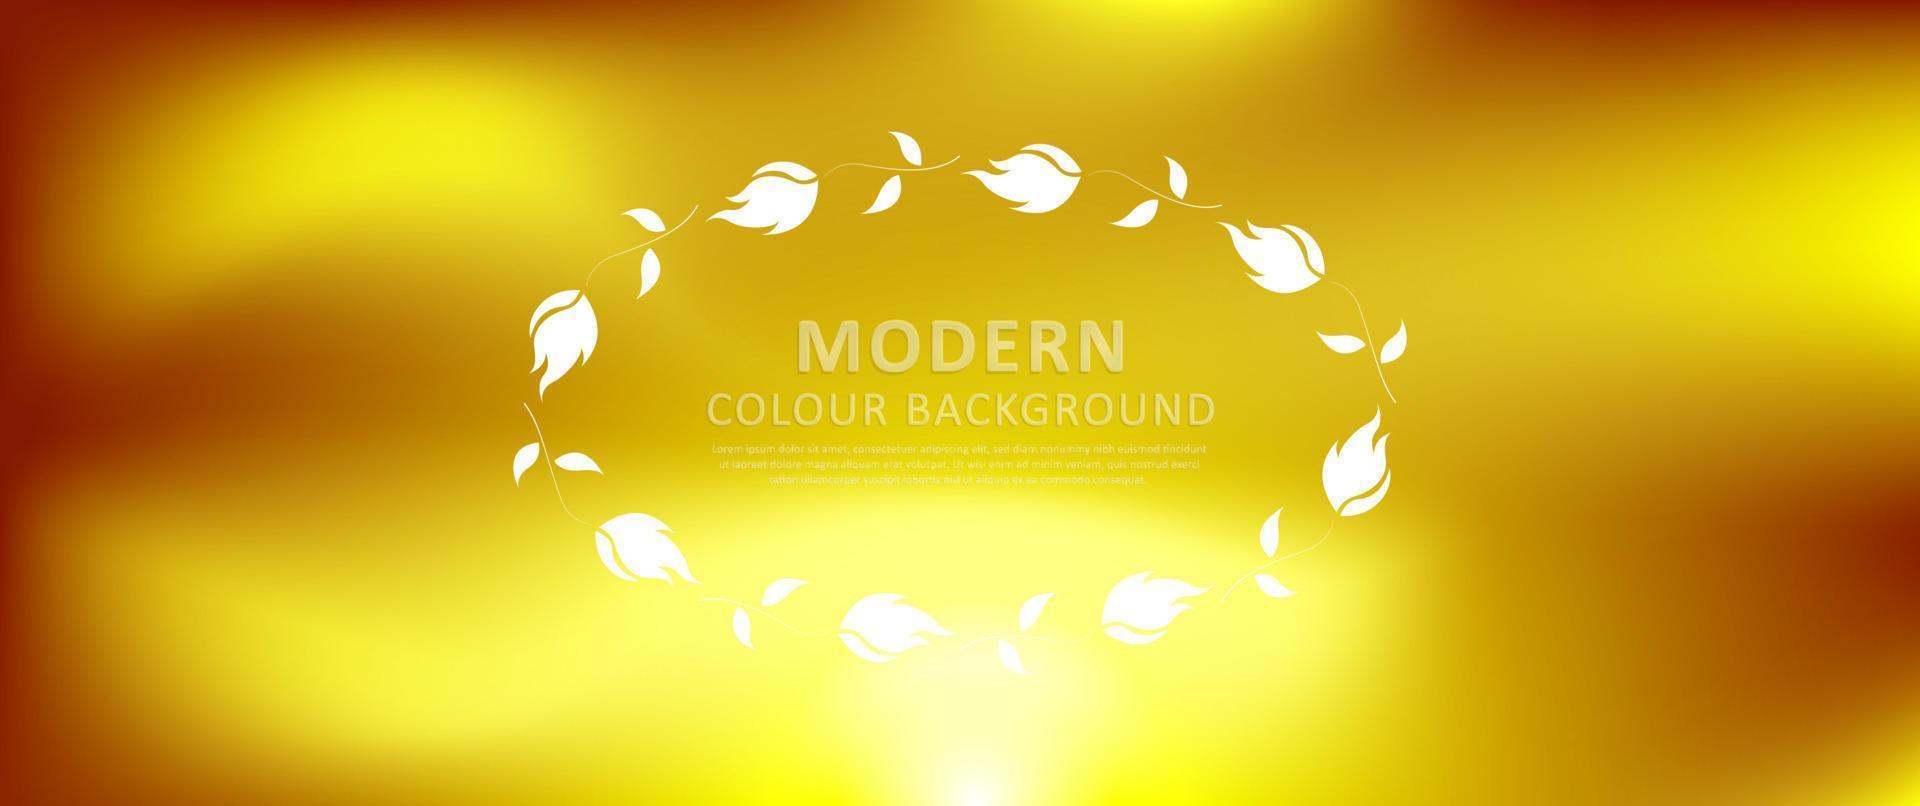 Modern Hologram Blur Colorful Abstract Background Design vector